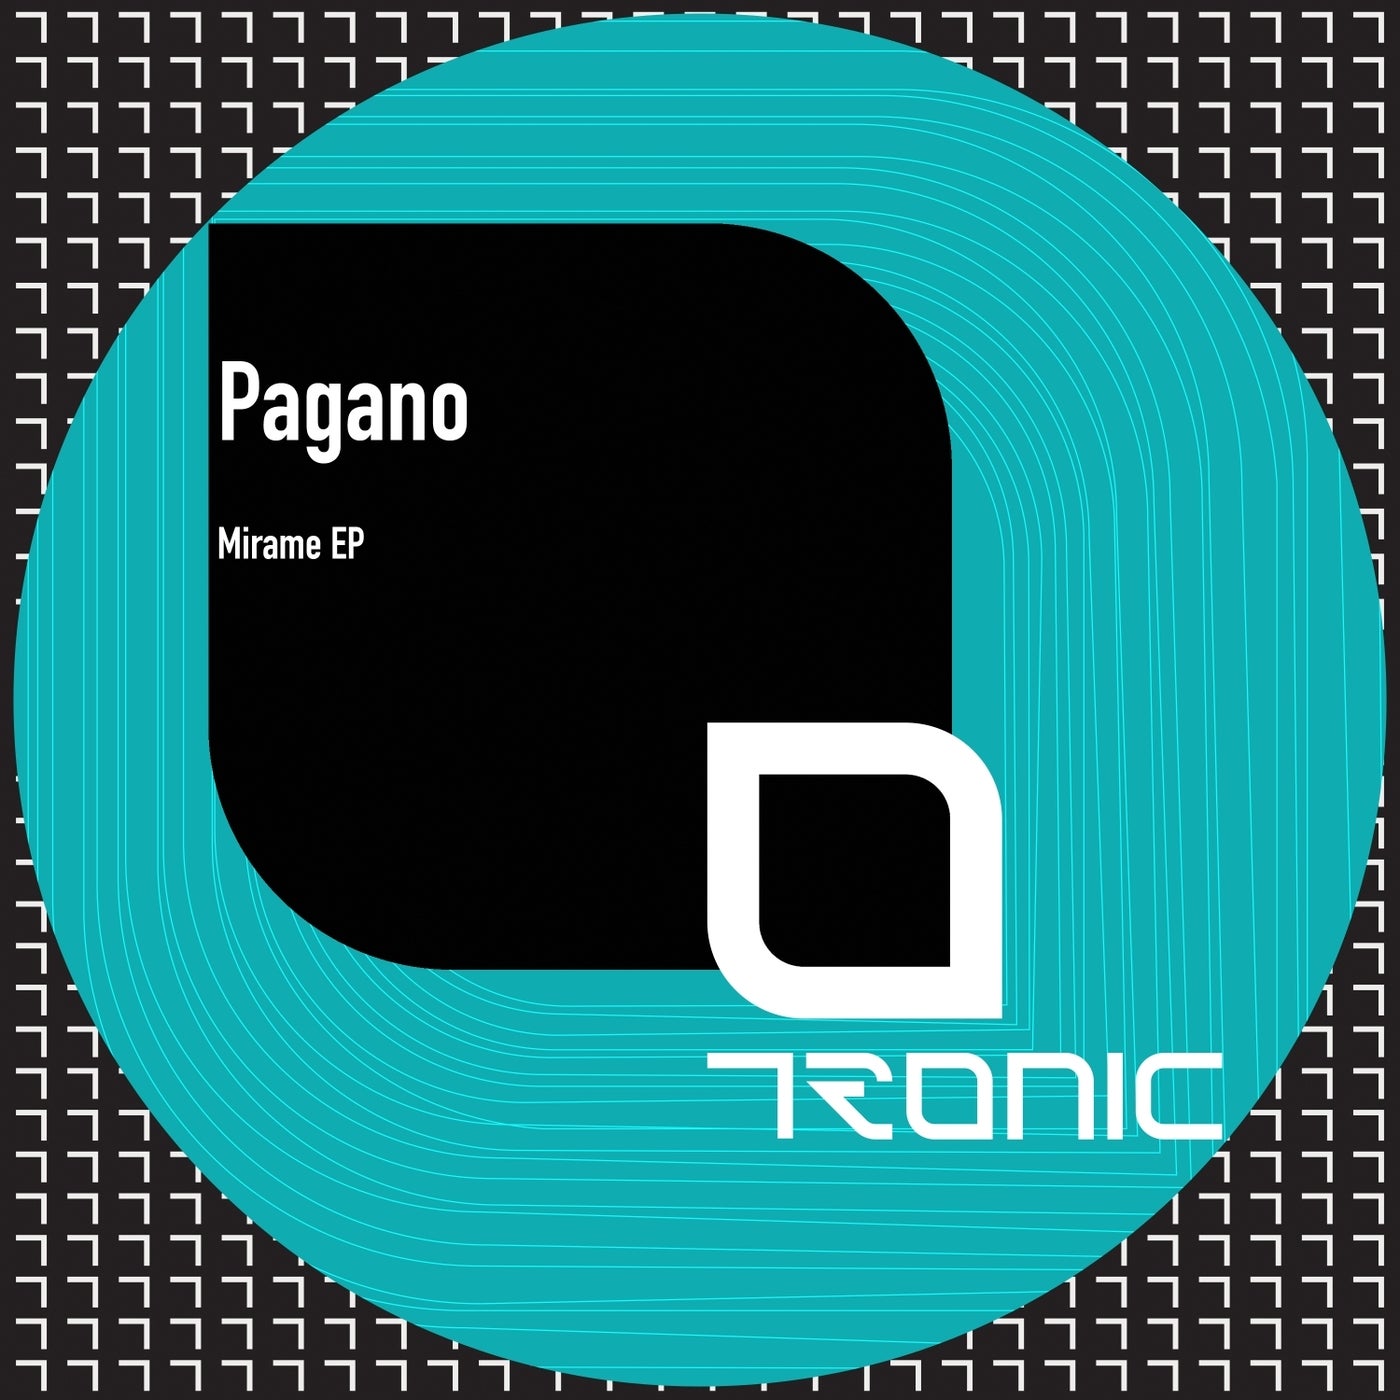 image cover: PAGANO - Mirame EP on Tronic